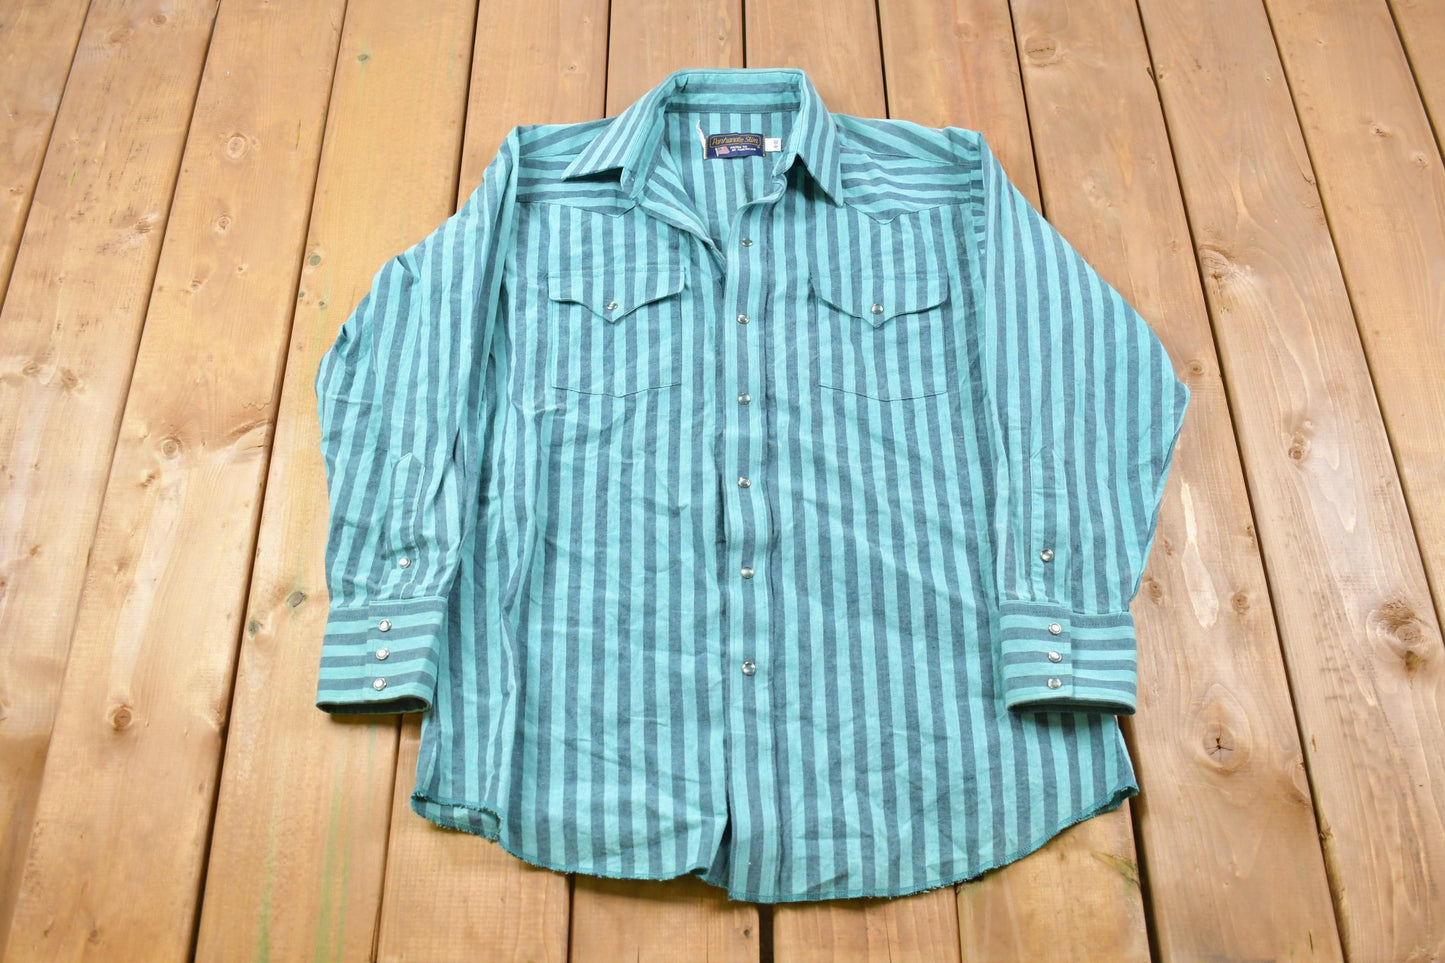 Vintage 1990s Panhandle Slim Striped Button Up Shirt / Made in USA / 1990s Button Up / Vintage Flannel / Casual Wear / Pattern Button Up